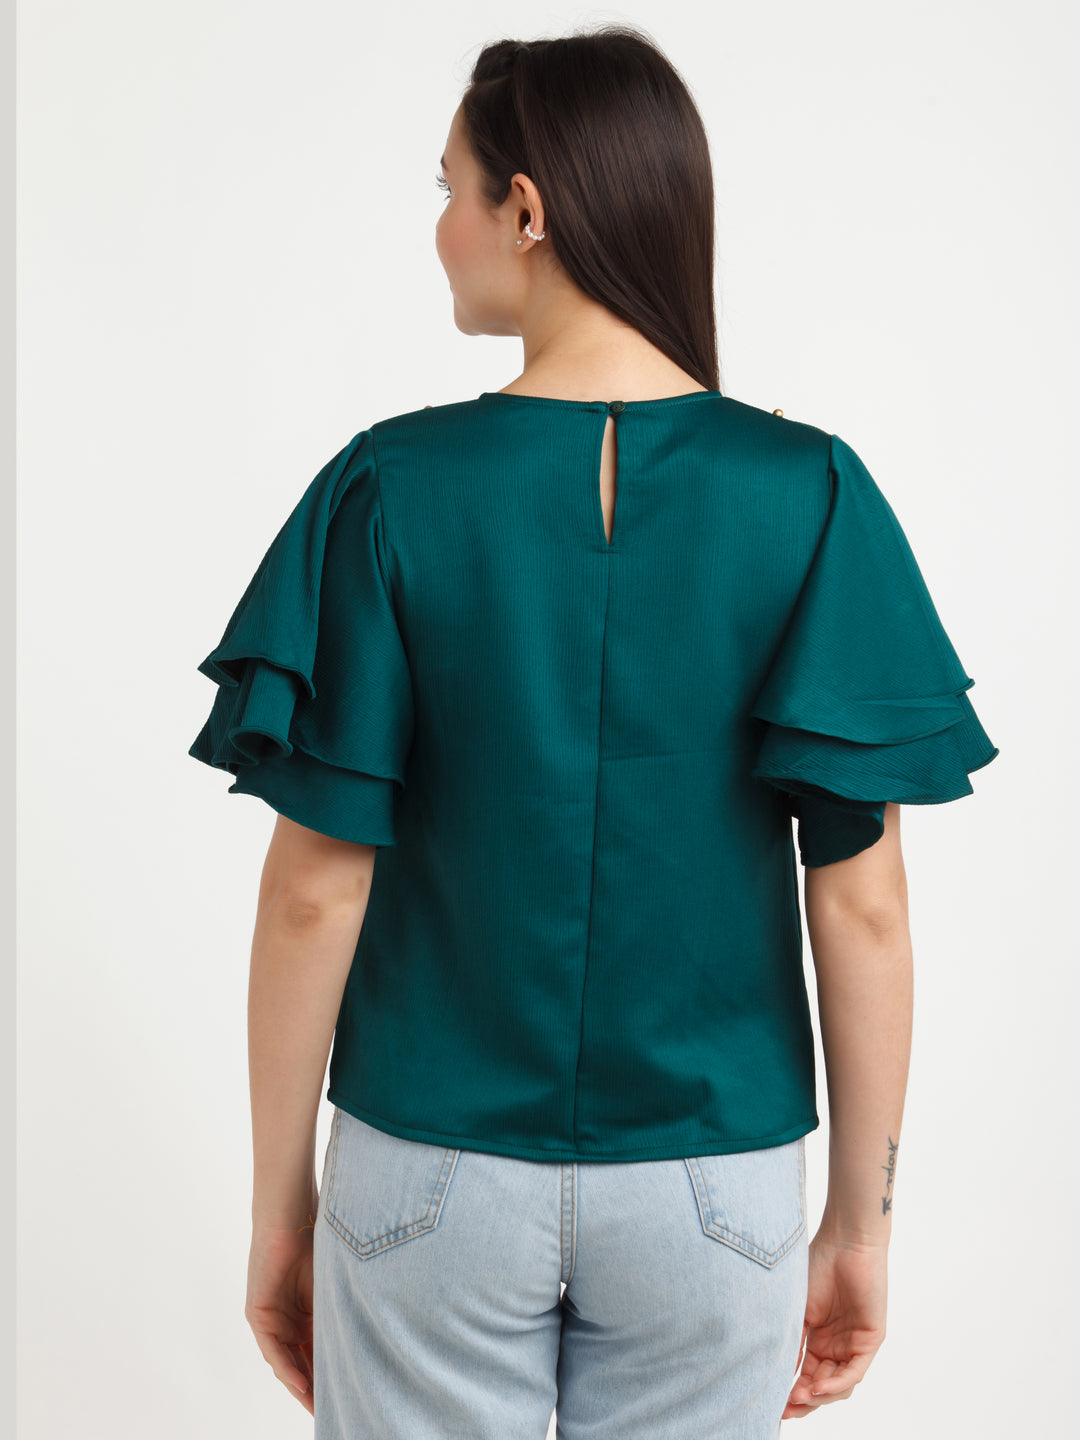 Green Embellished Top For Women